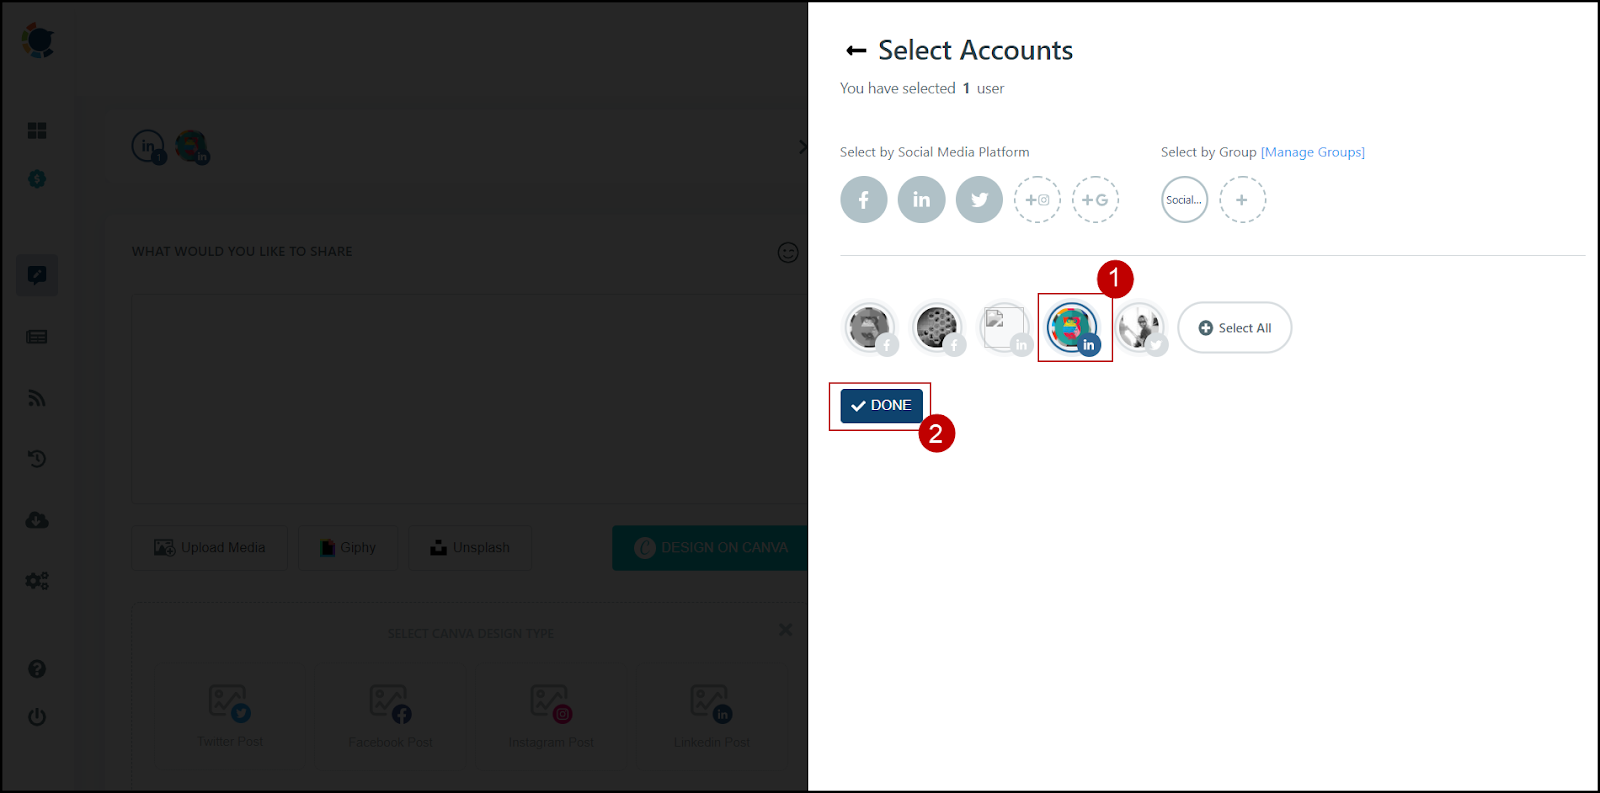 You can select multiple LinkedIn accounts.